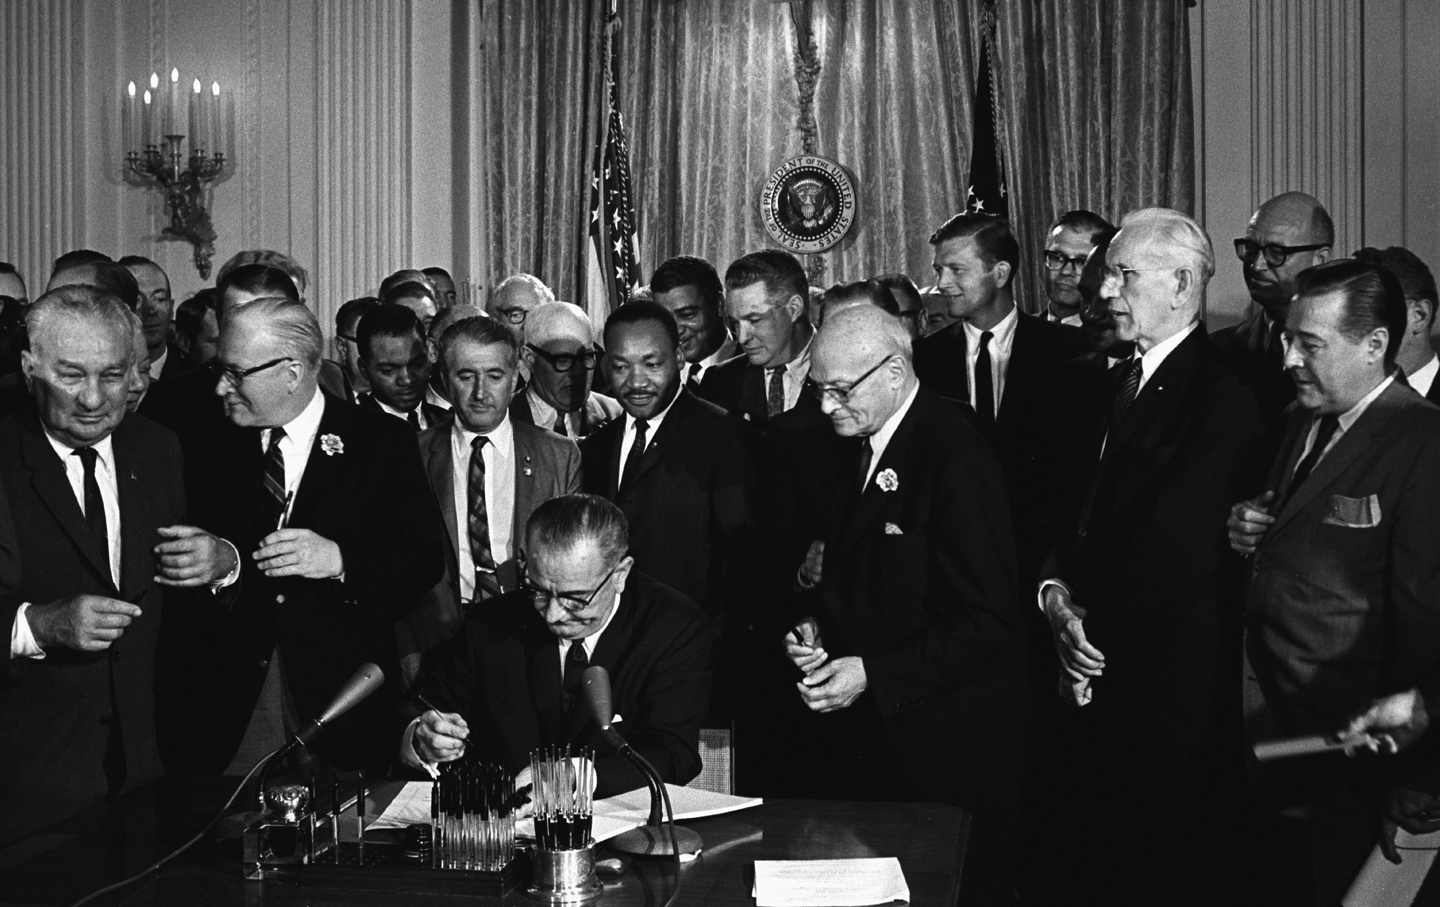 July 2, 1964: President Lyndon Johnson Signs the Civil Rights Act